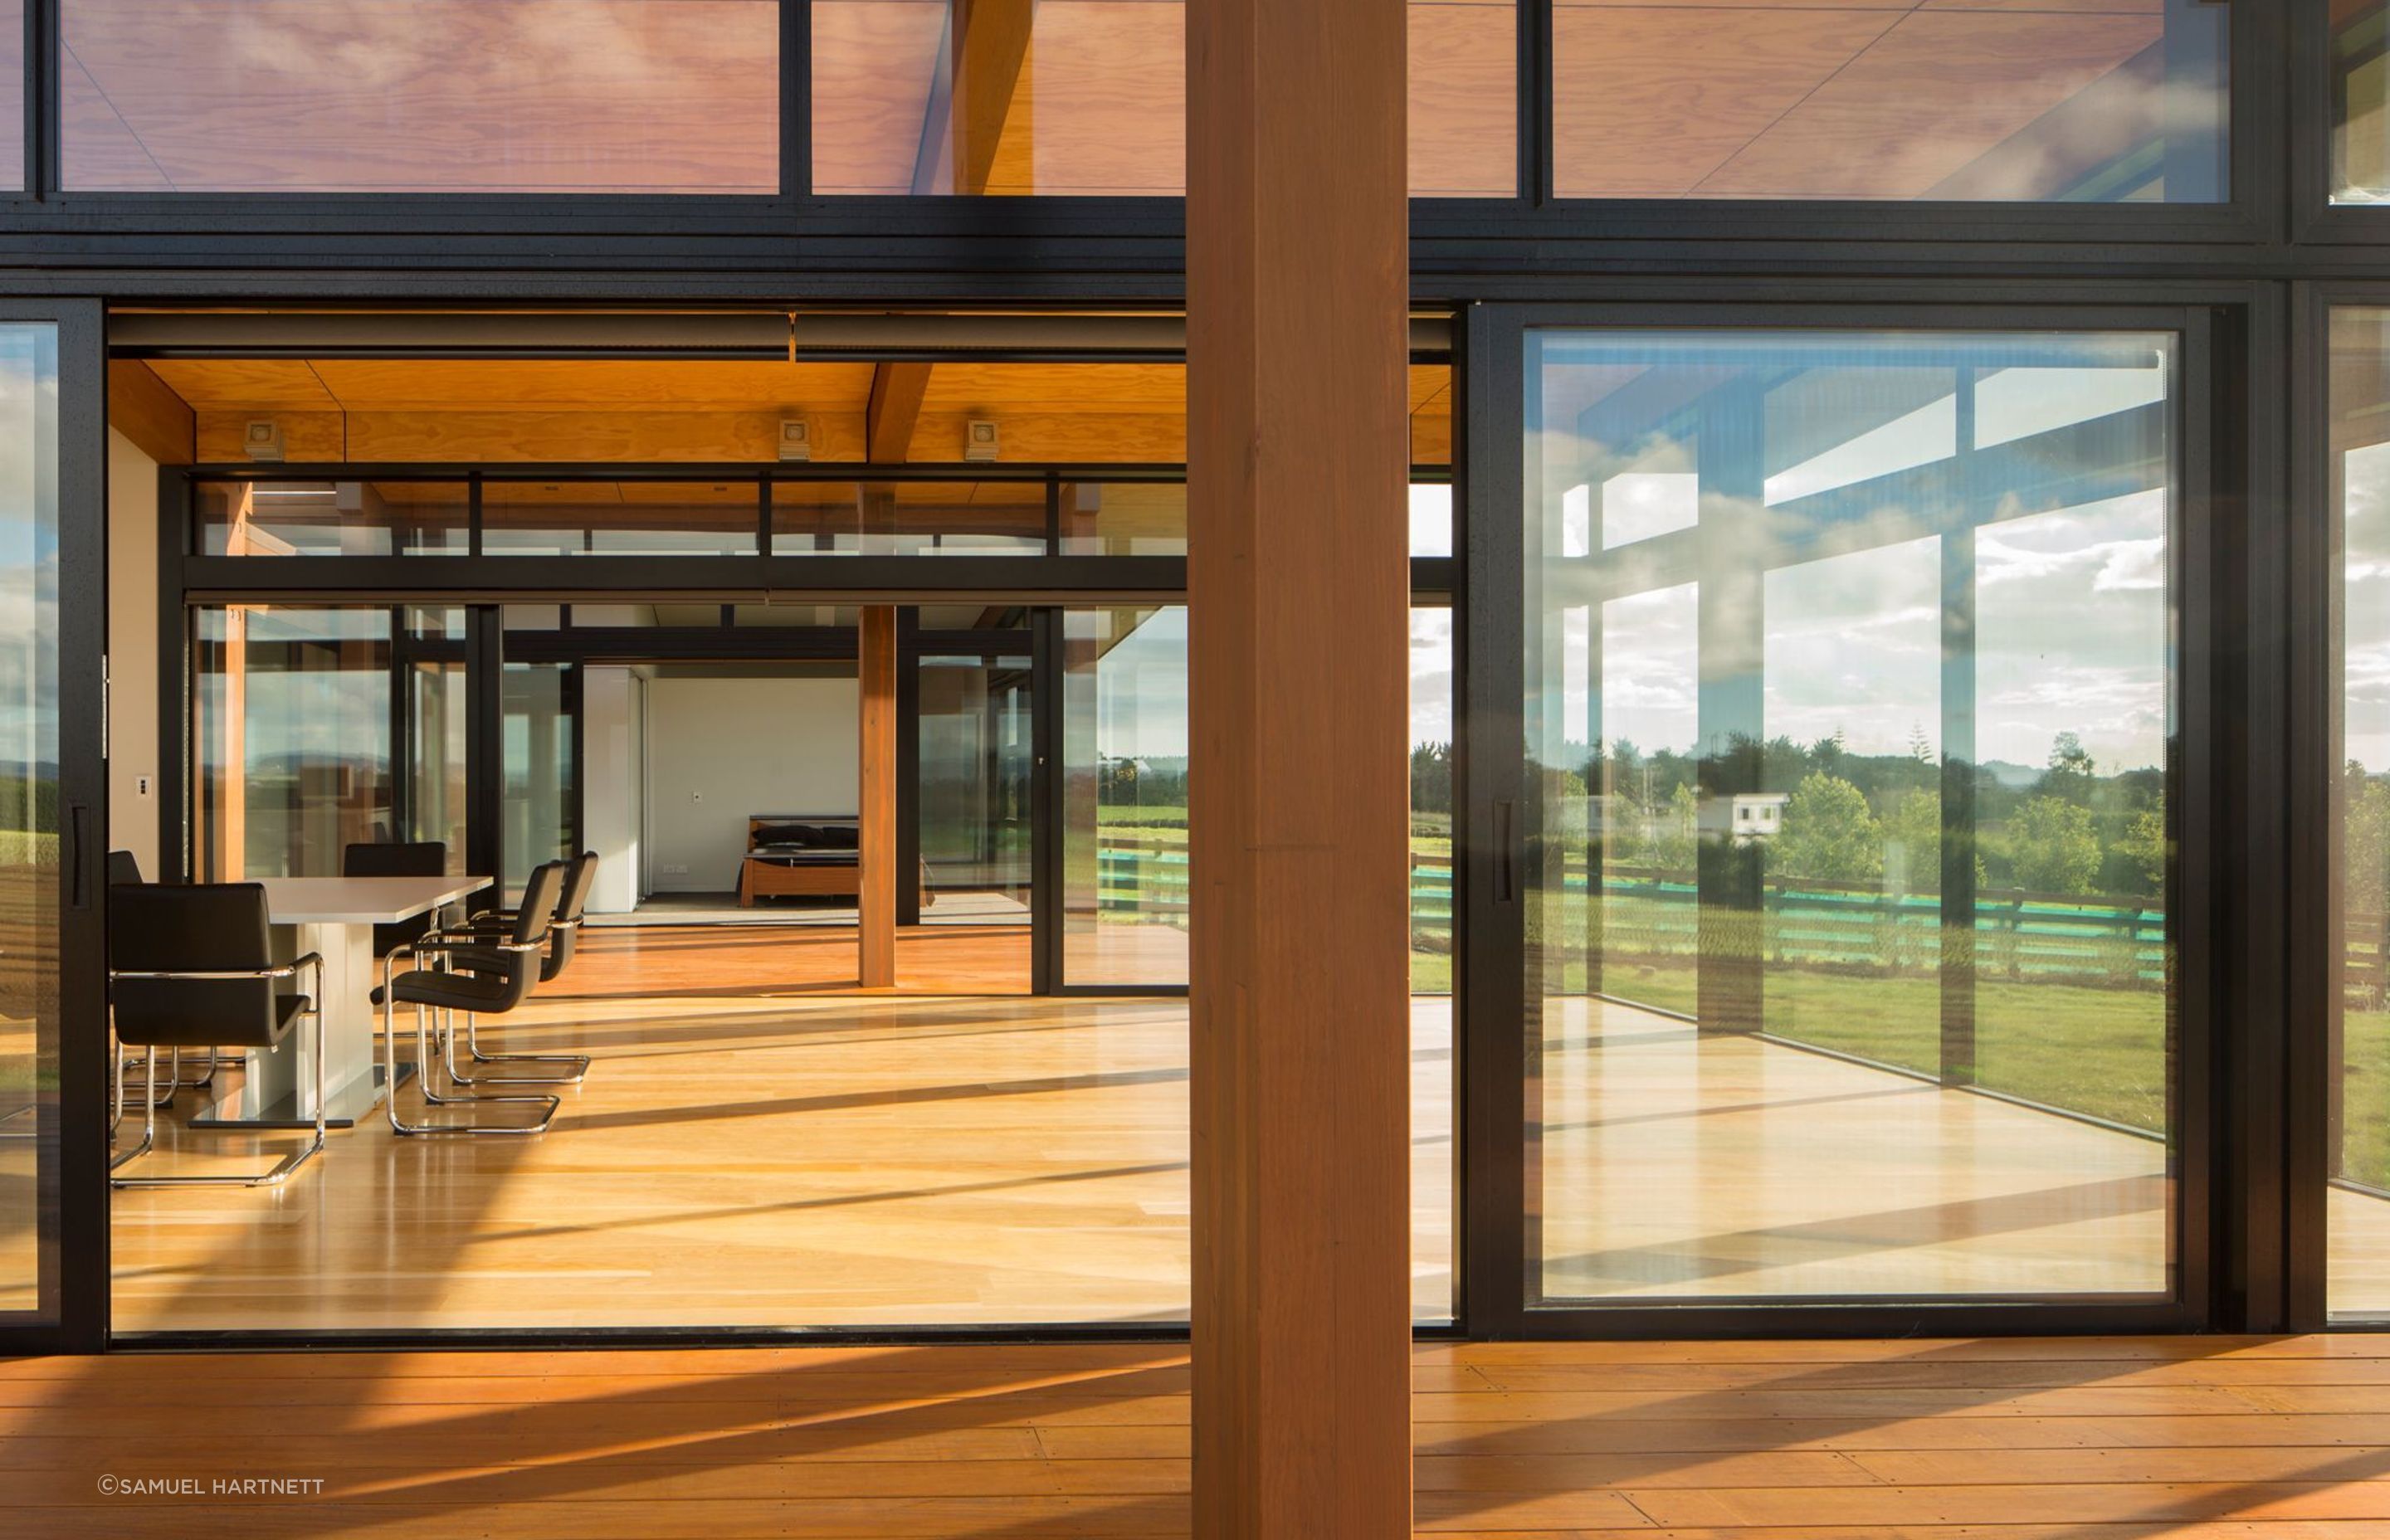 Two pavilions are linked by extensive decking and extensive glazing.